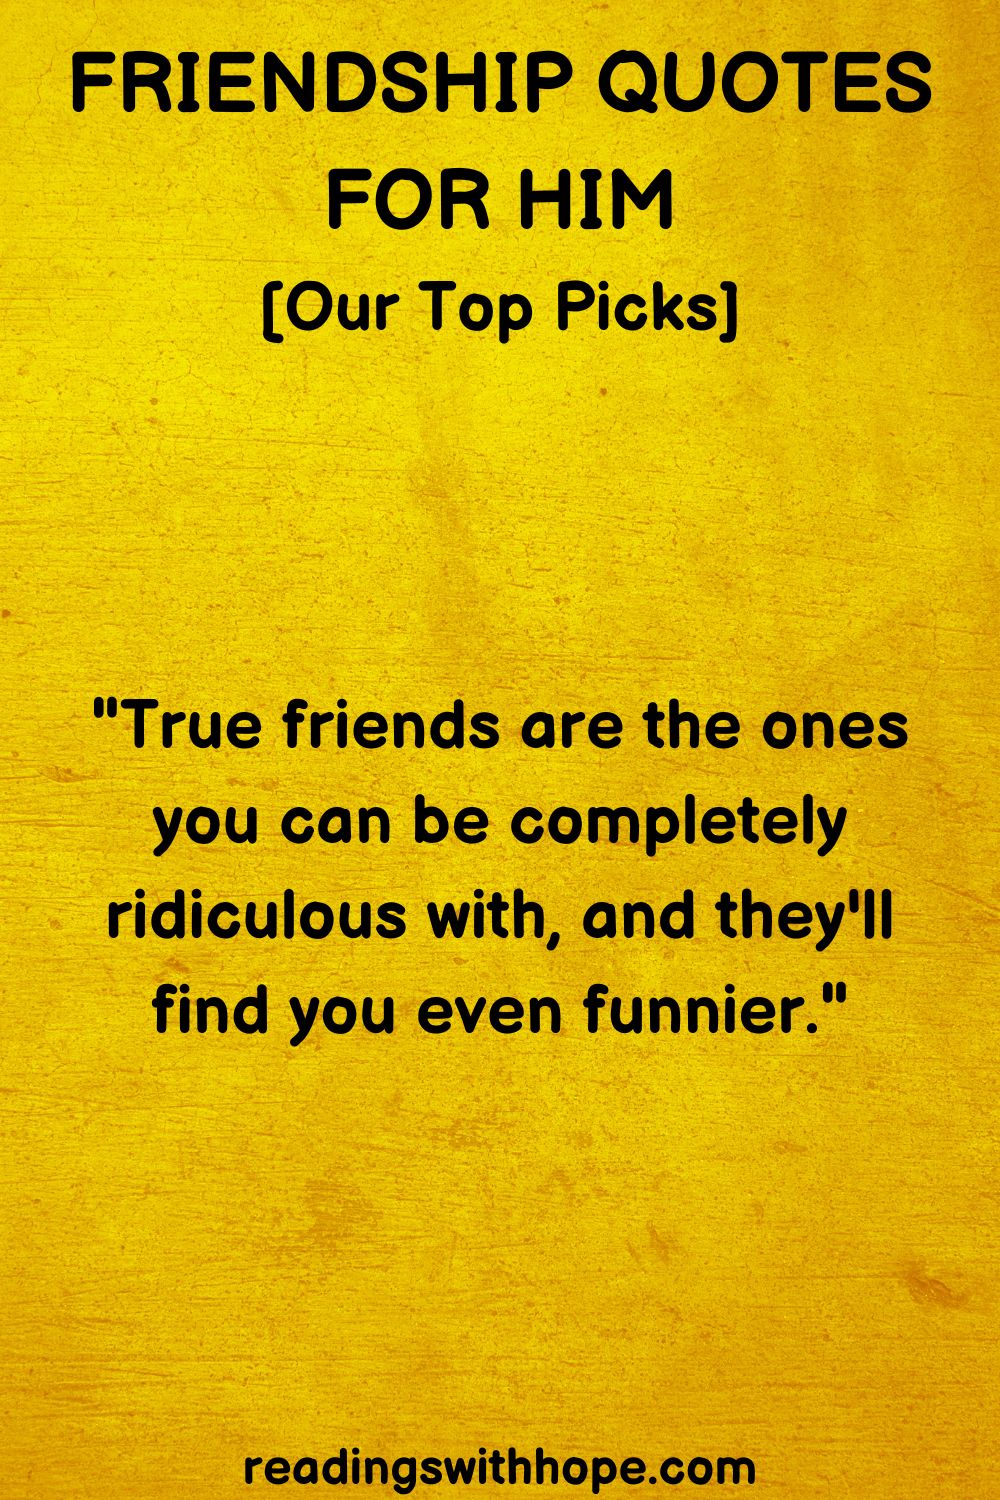 Friendship Quotes for Him